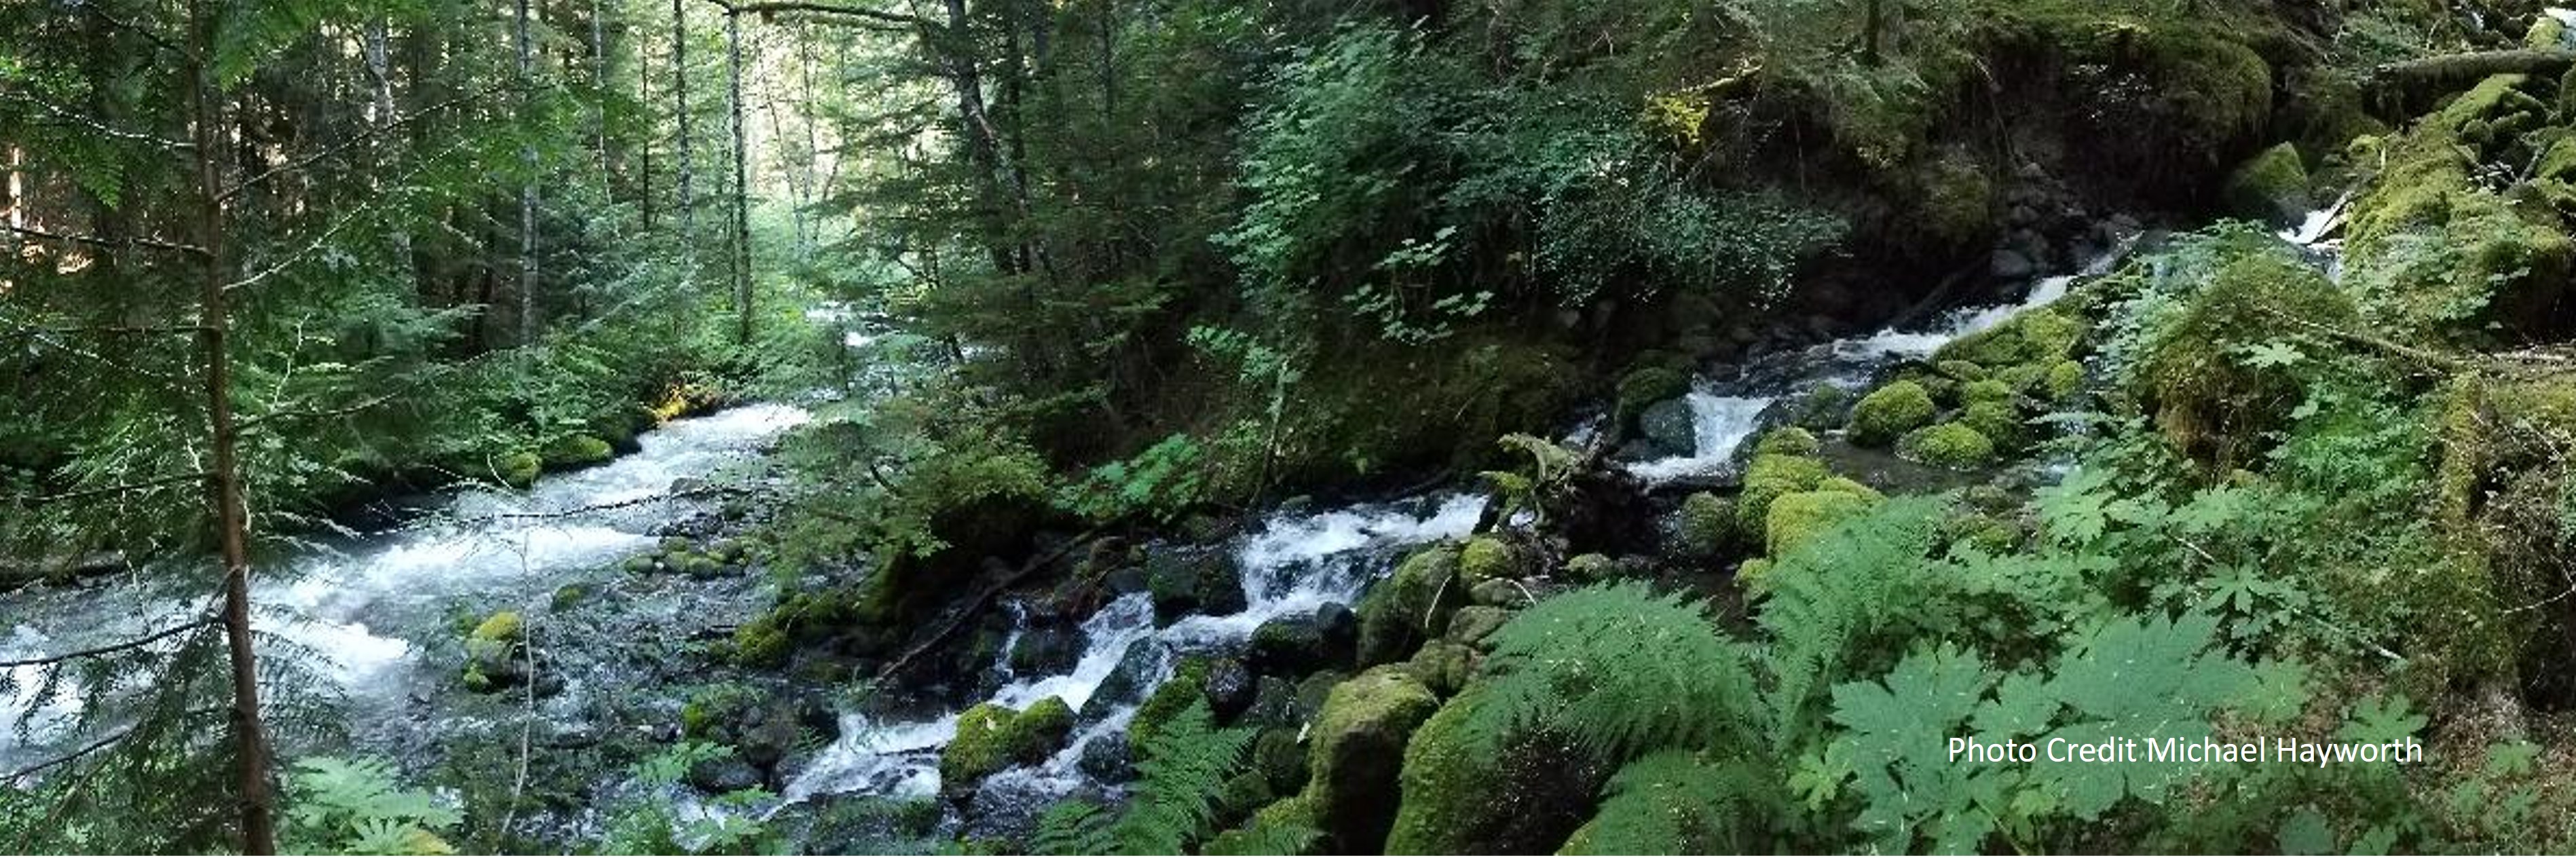 A Pacific Northwest Tributary